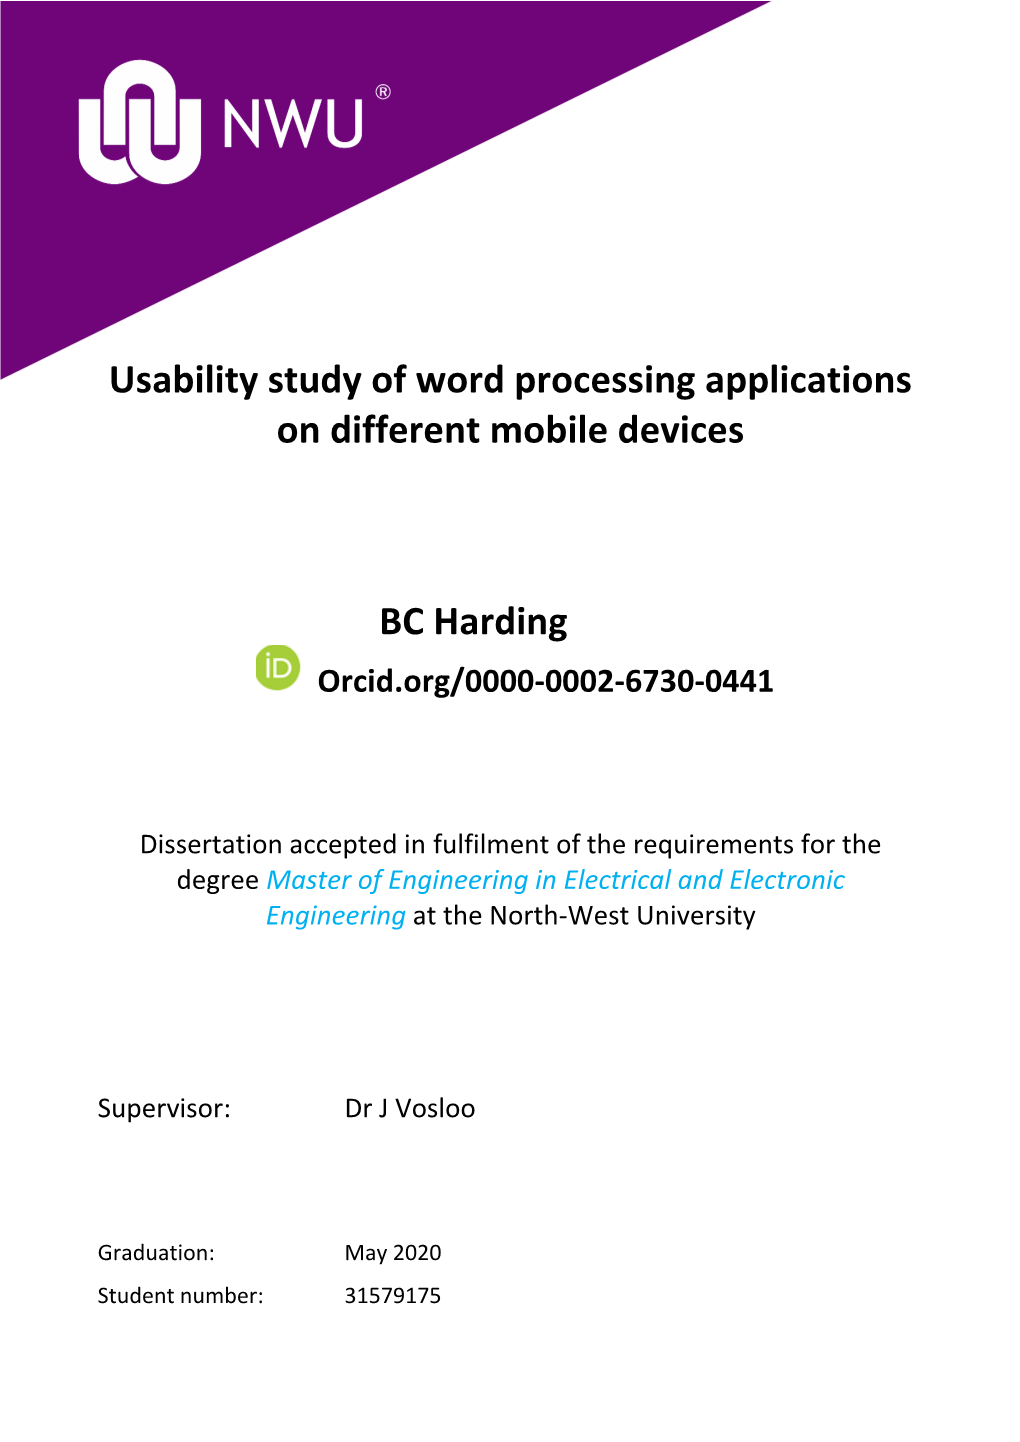 Usability Study of Word Processing Applications on Different Mobile Devices